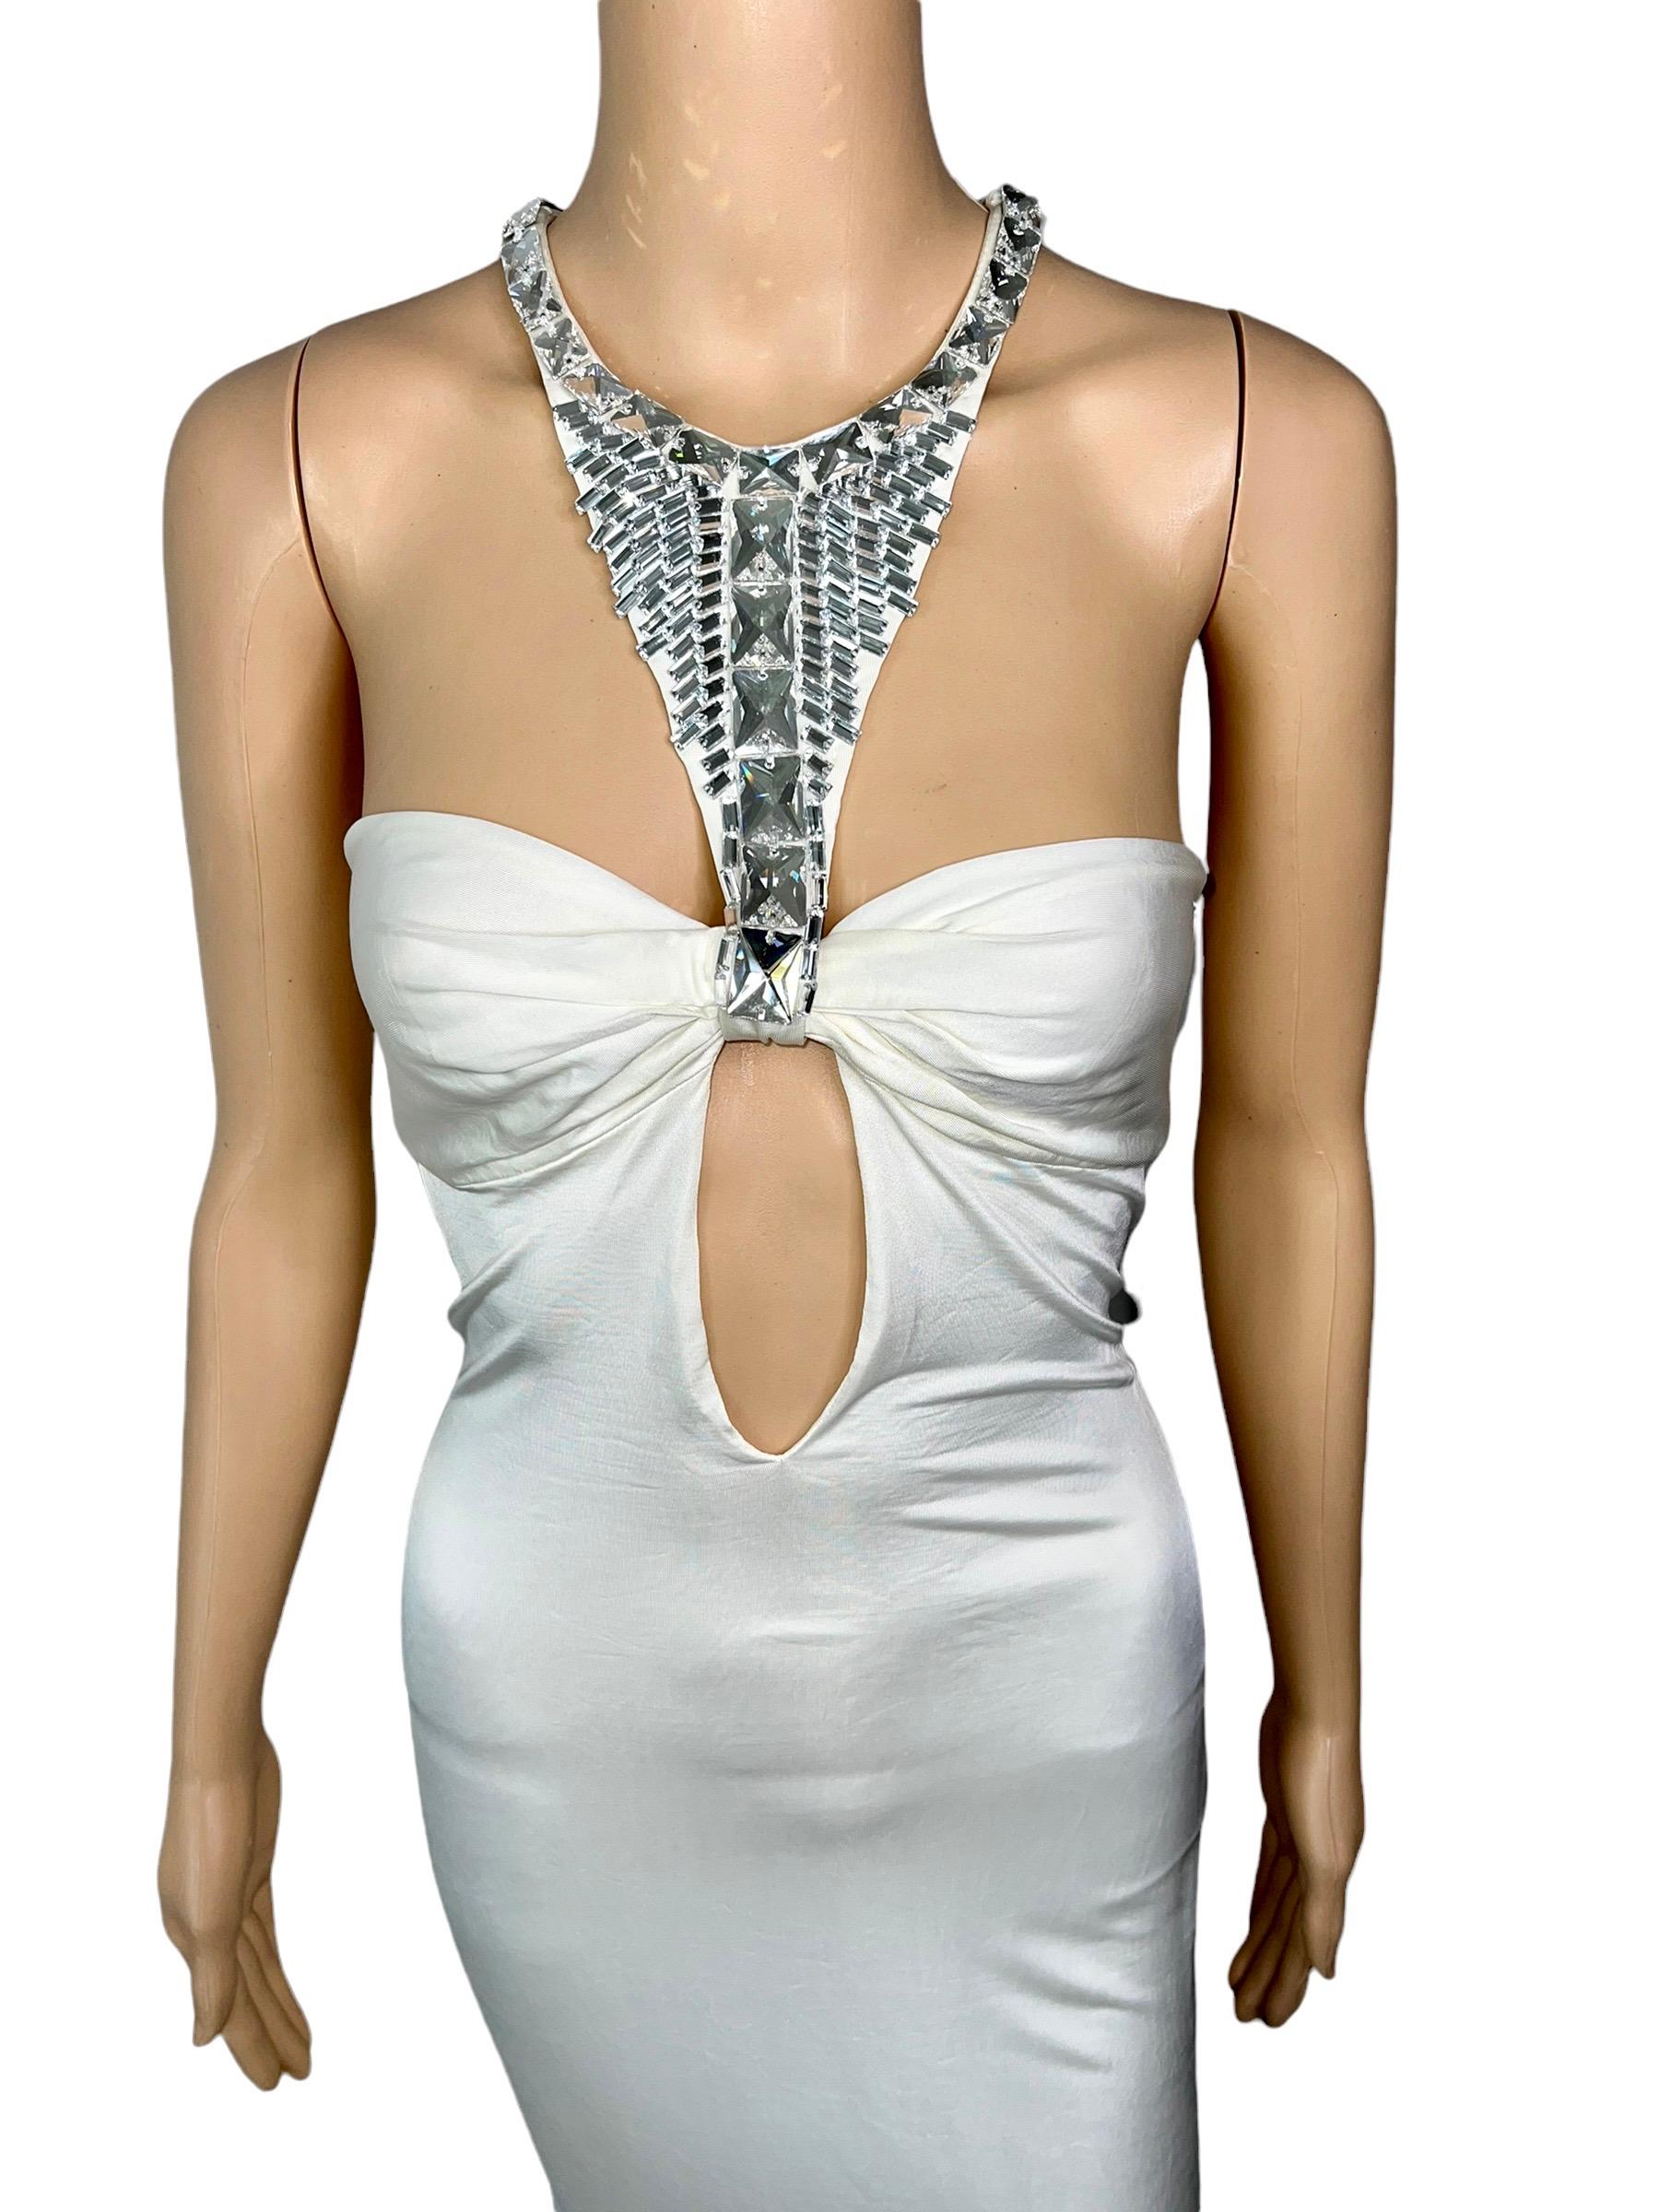 Tom Ford for Gucci F/W 2004 Embellished Plunging Cutout Ivory Evening Dress Gown For Sale 6